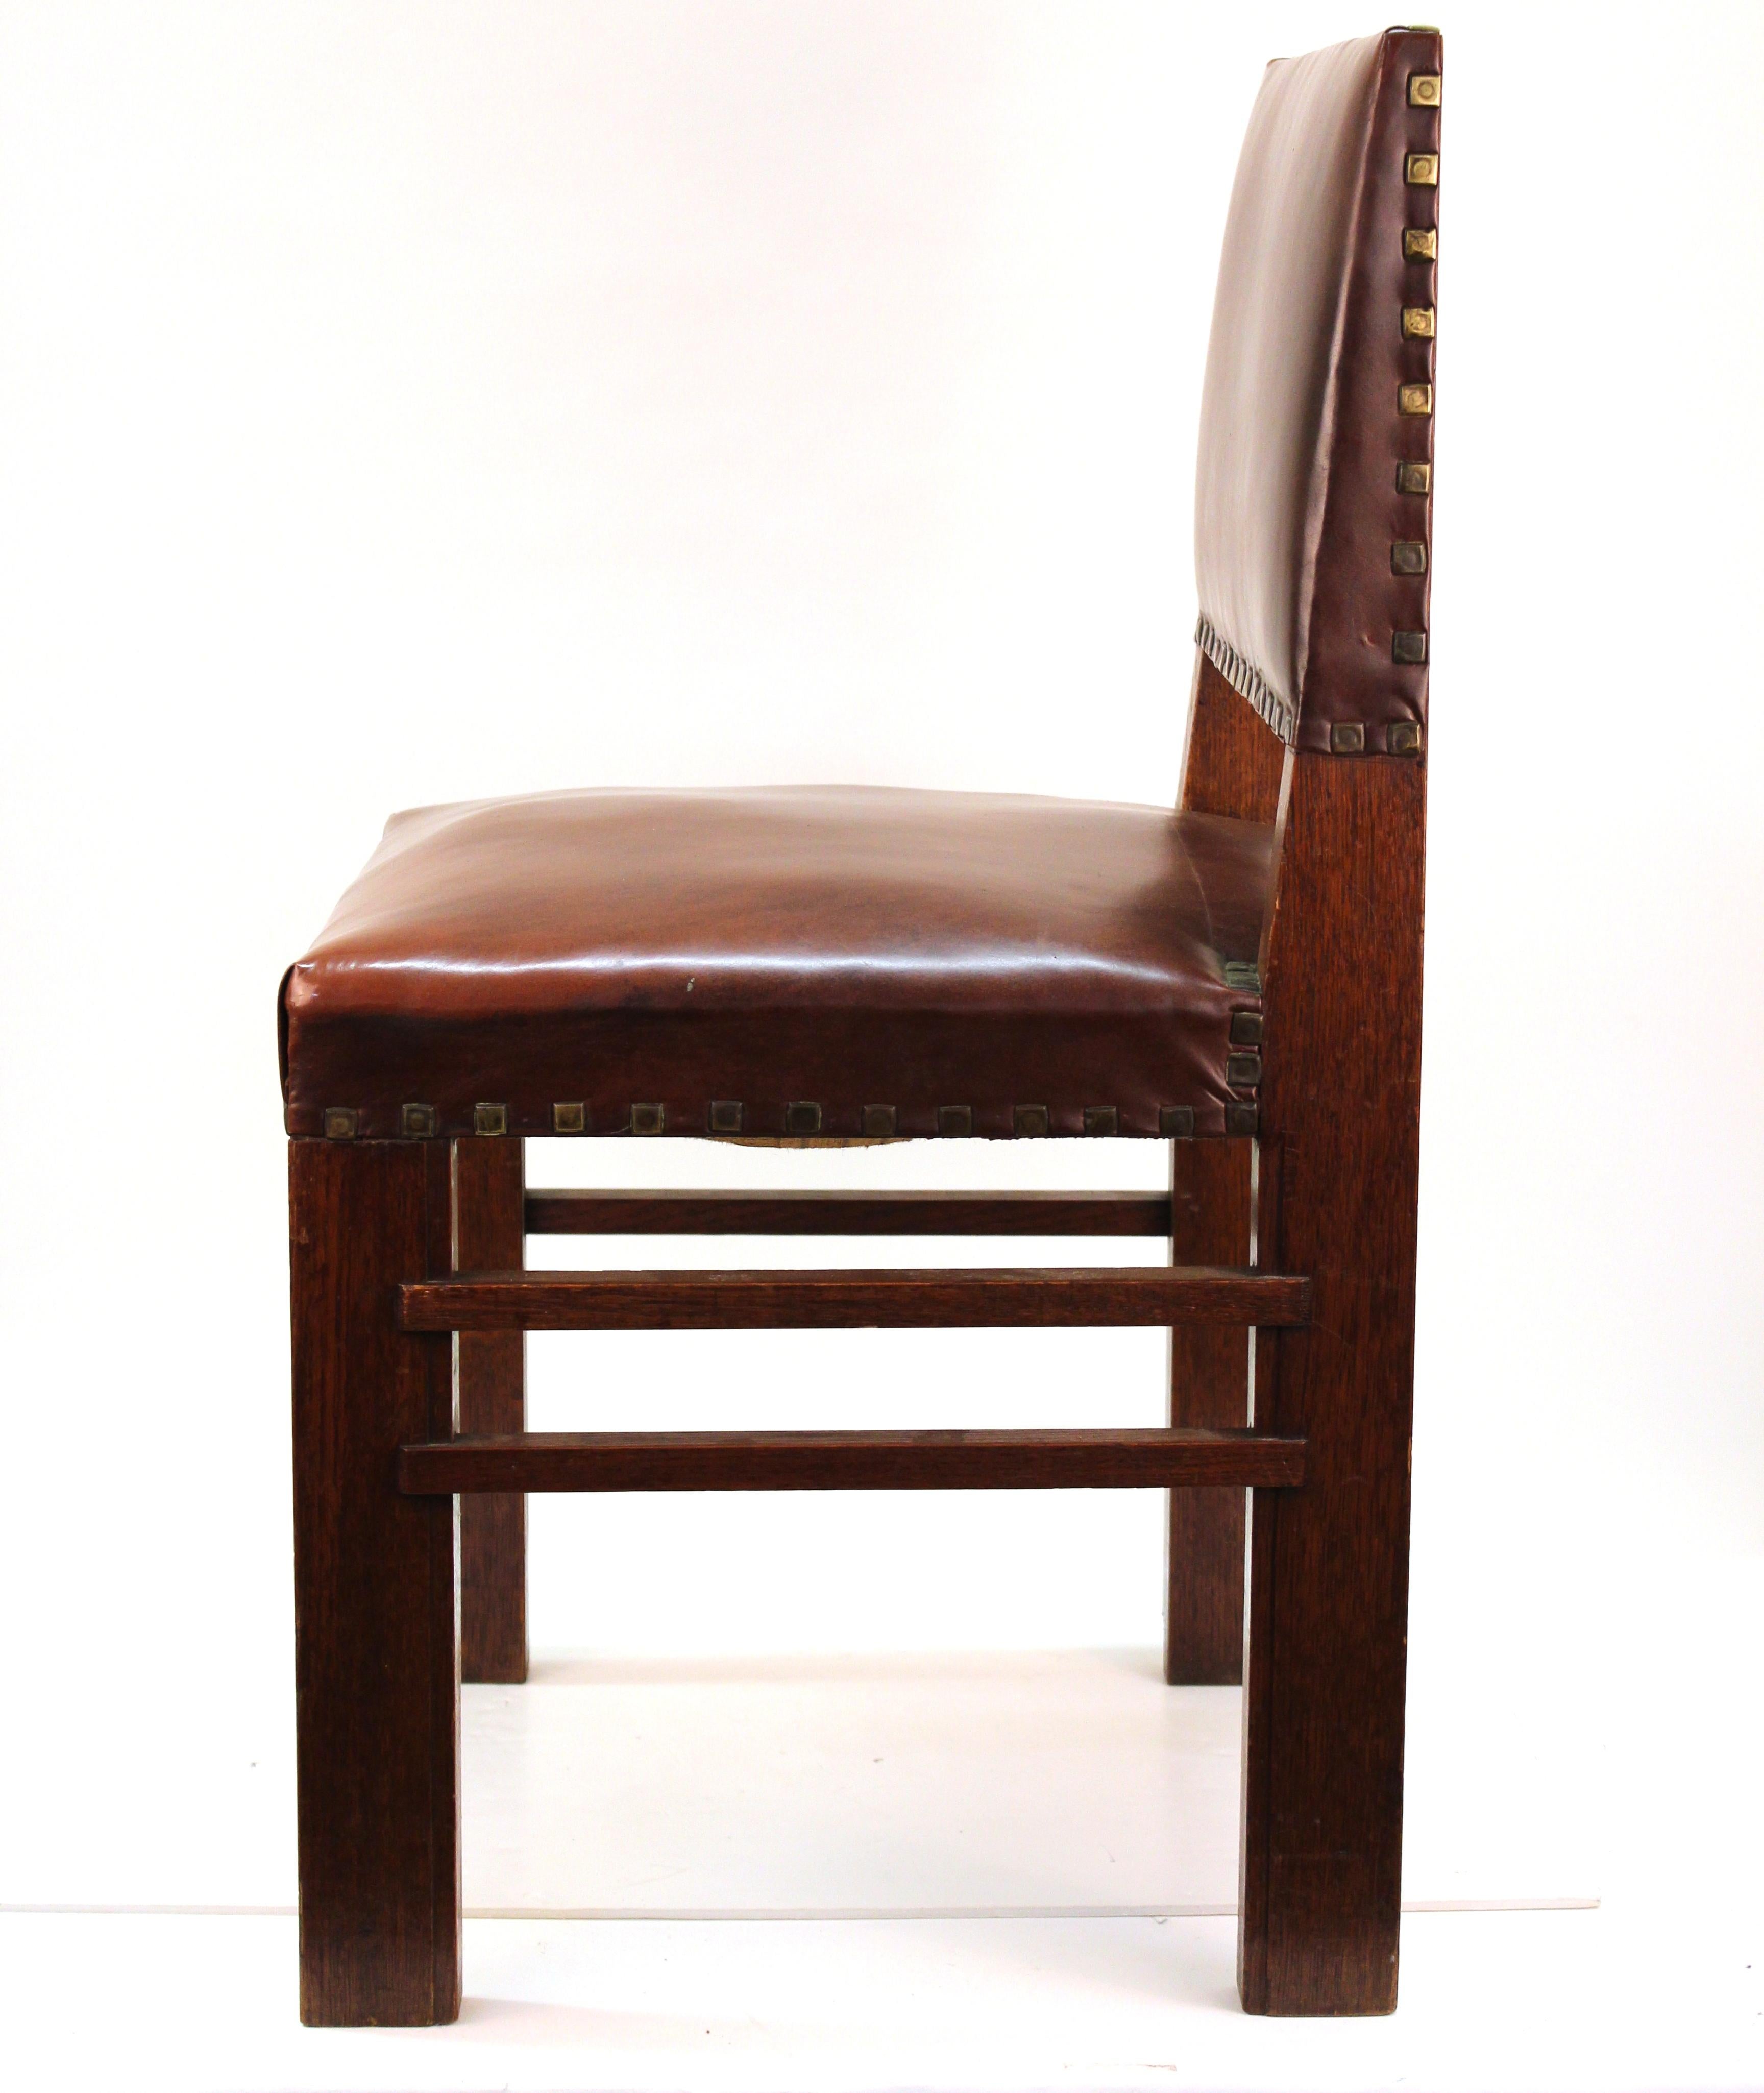 Arts and Crafts American Arts & Crafts Oak Chairs with Cognac Colored Leather Seats For Sale